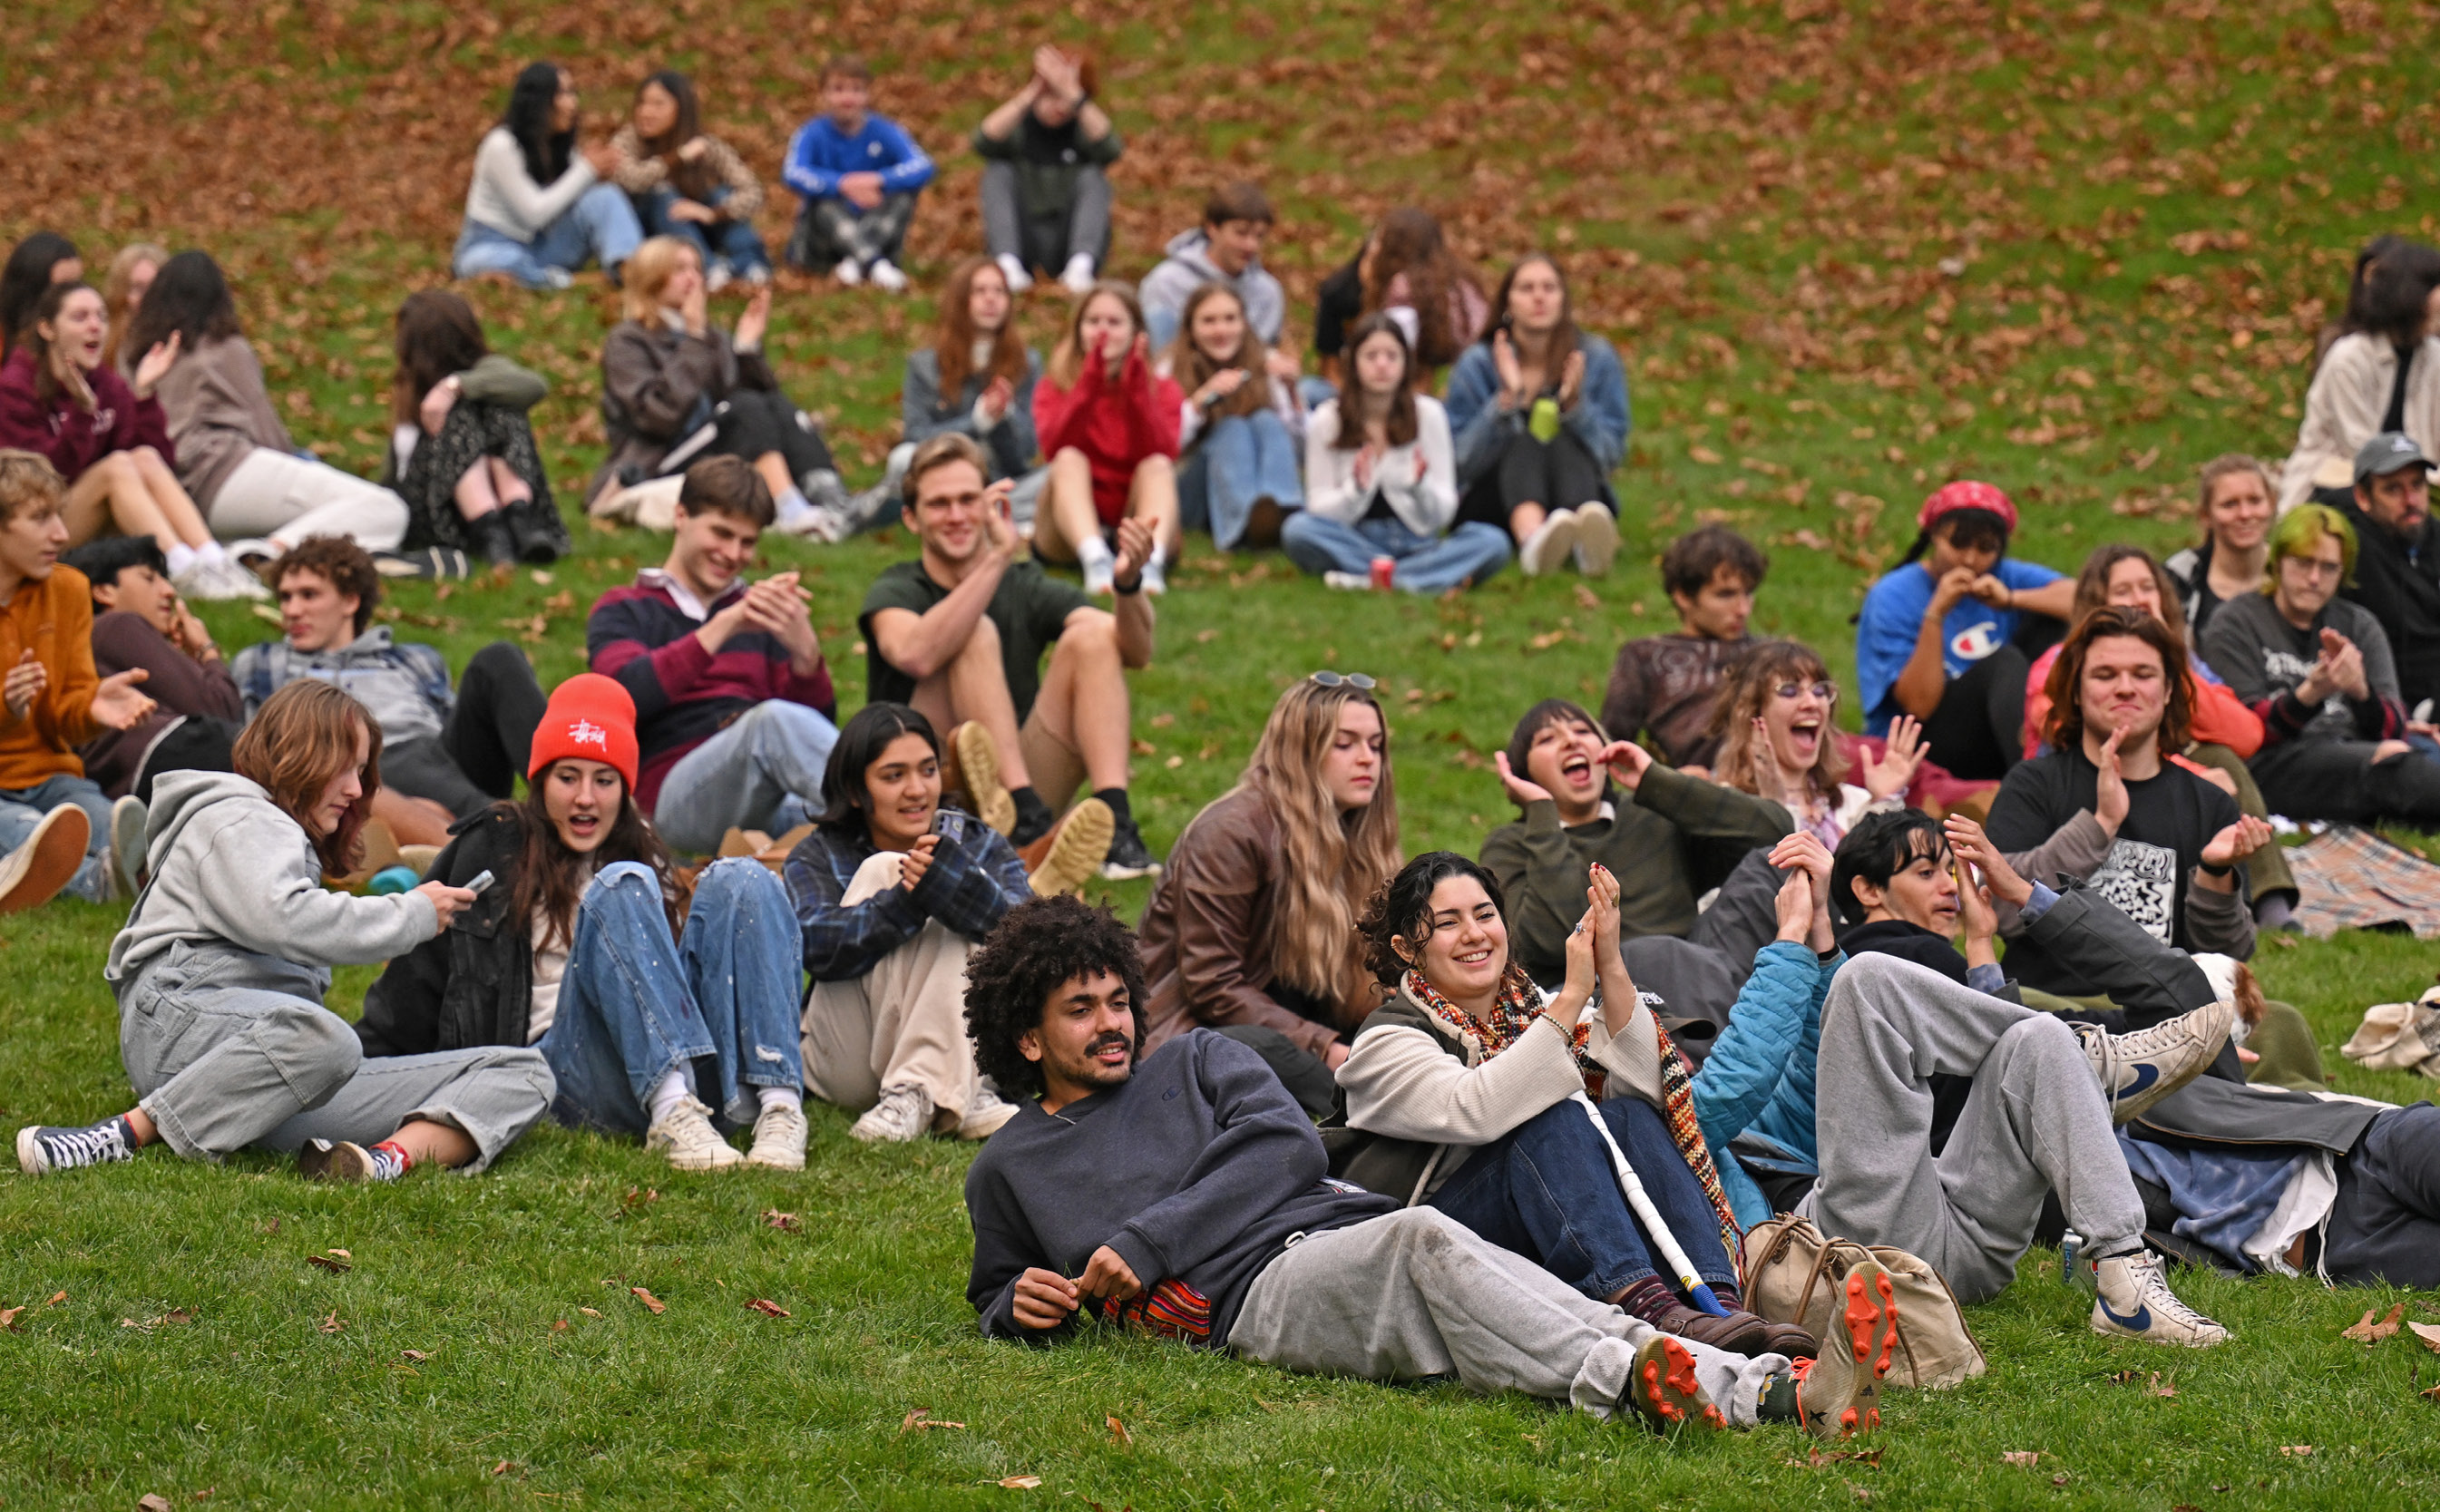 Students on the grass listening to live music